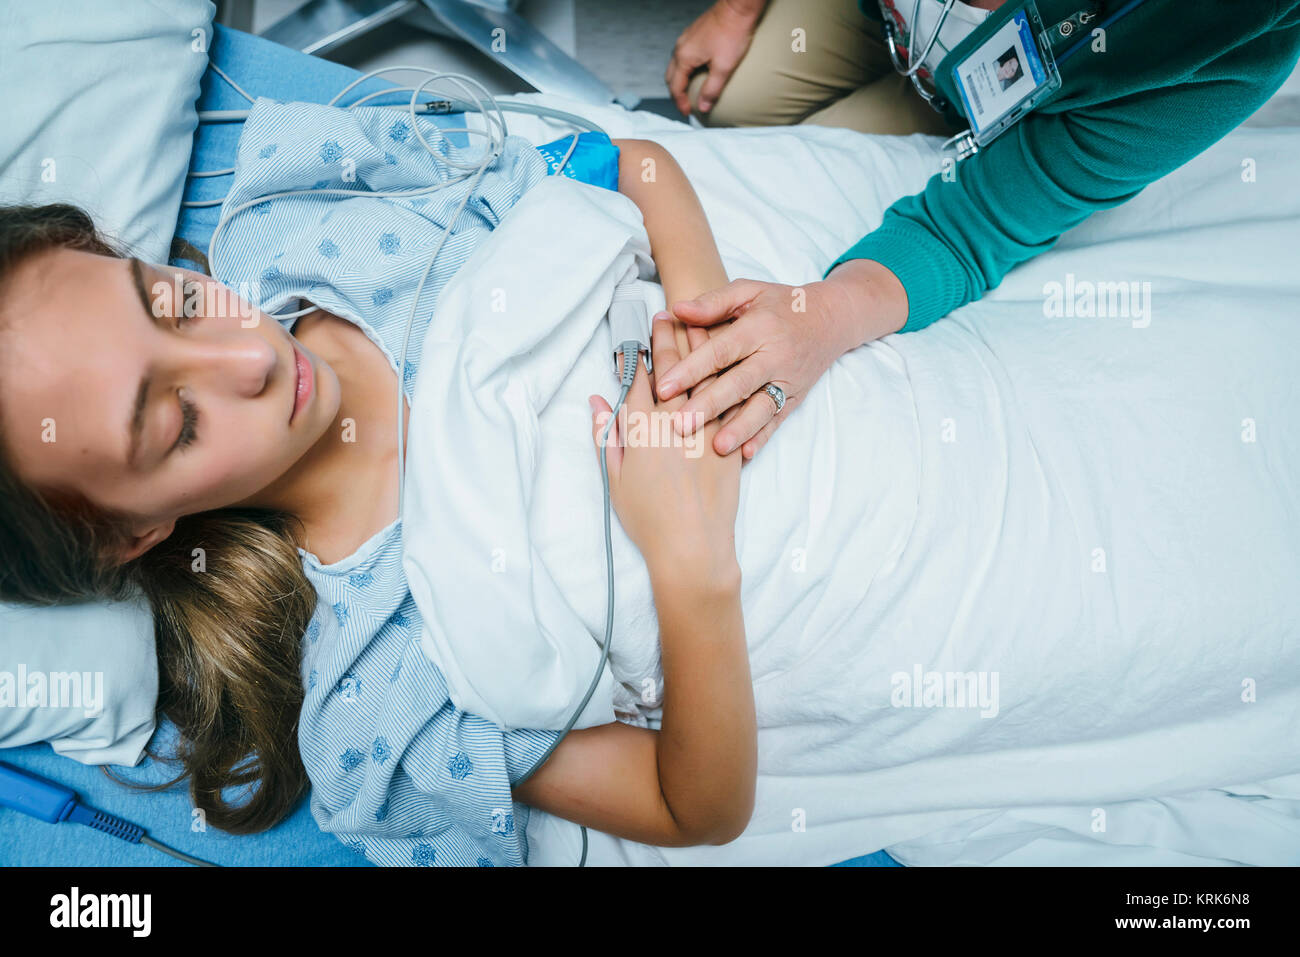 Caucasian doctor comforting patient in hospital bed Stock Photo